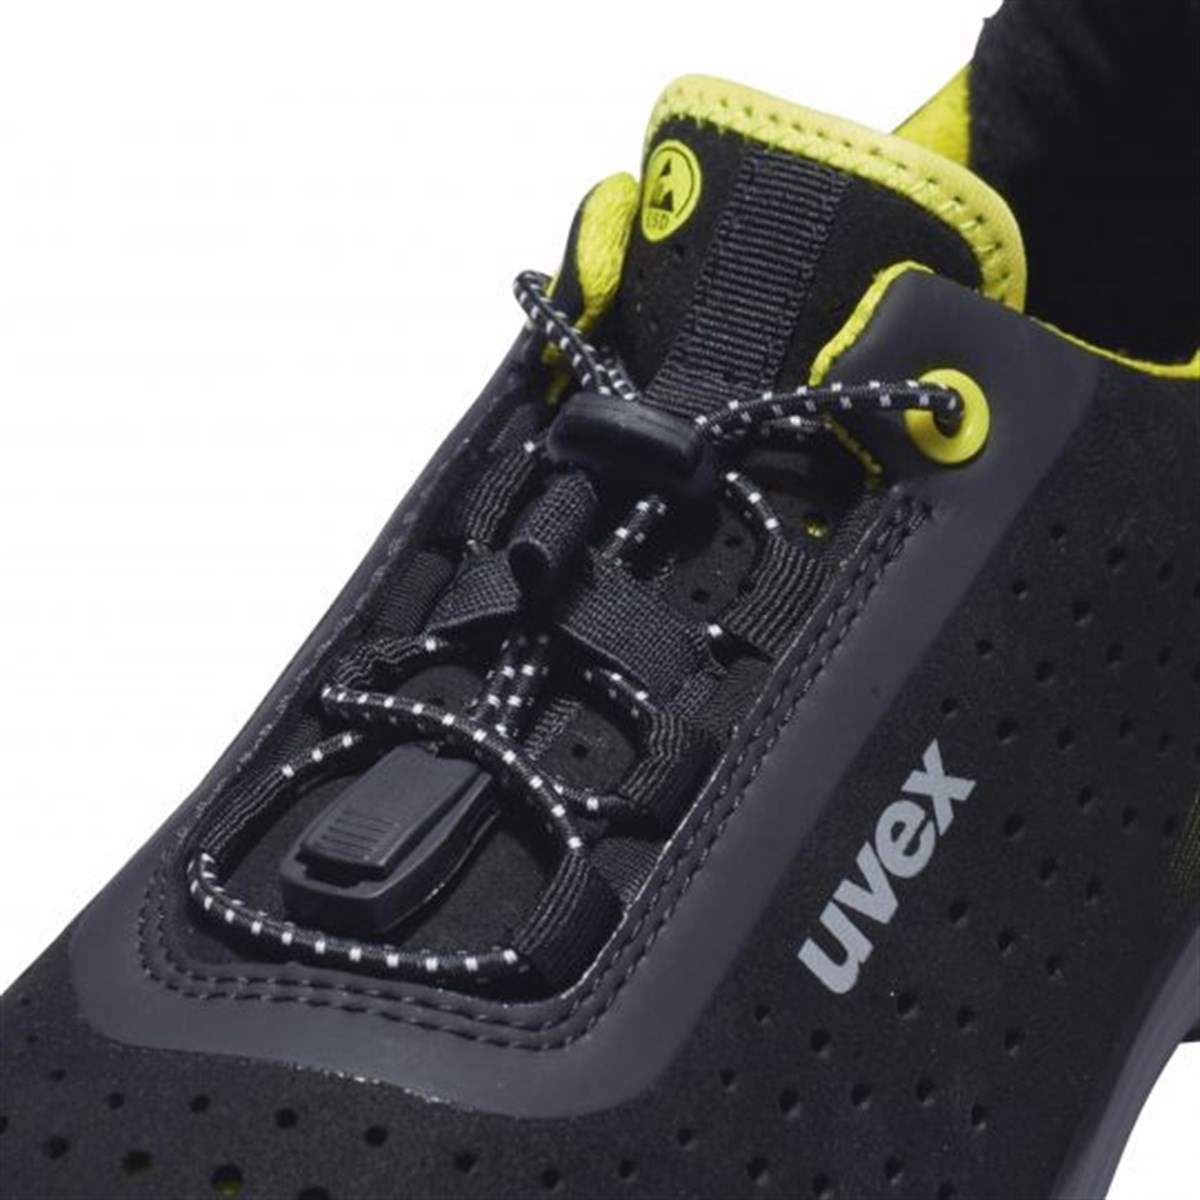 UVEX 1 G2 6843 S1 SRC ESD WORK SHOES